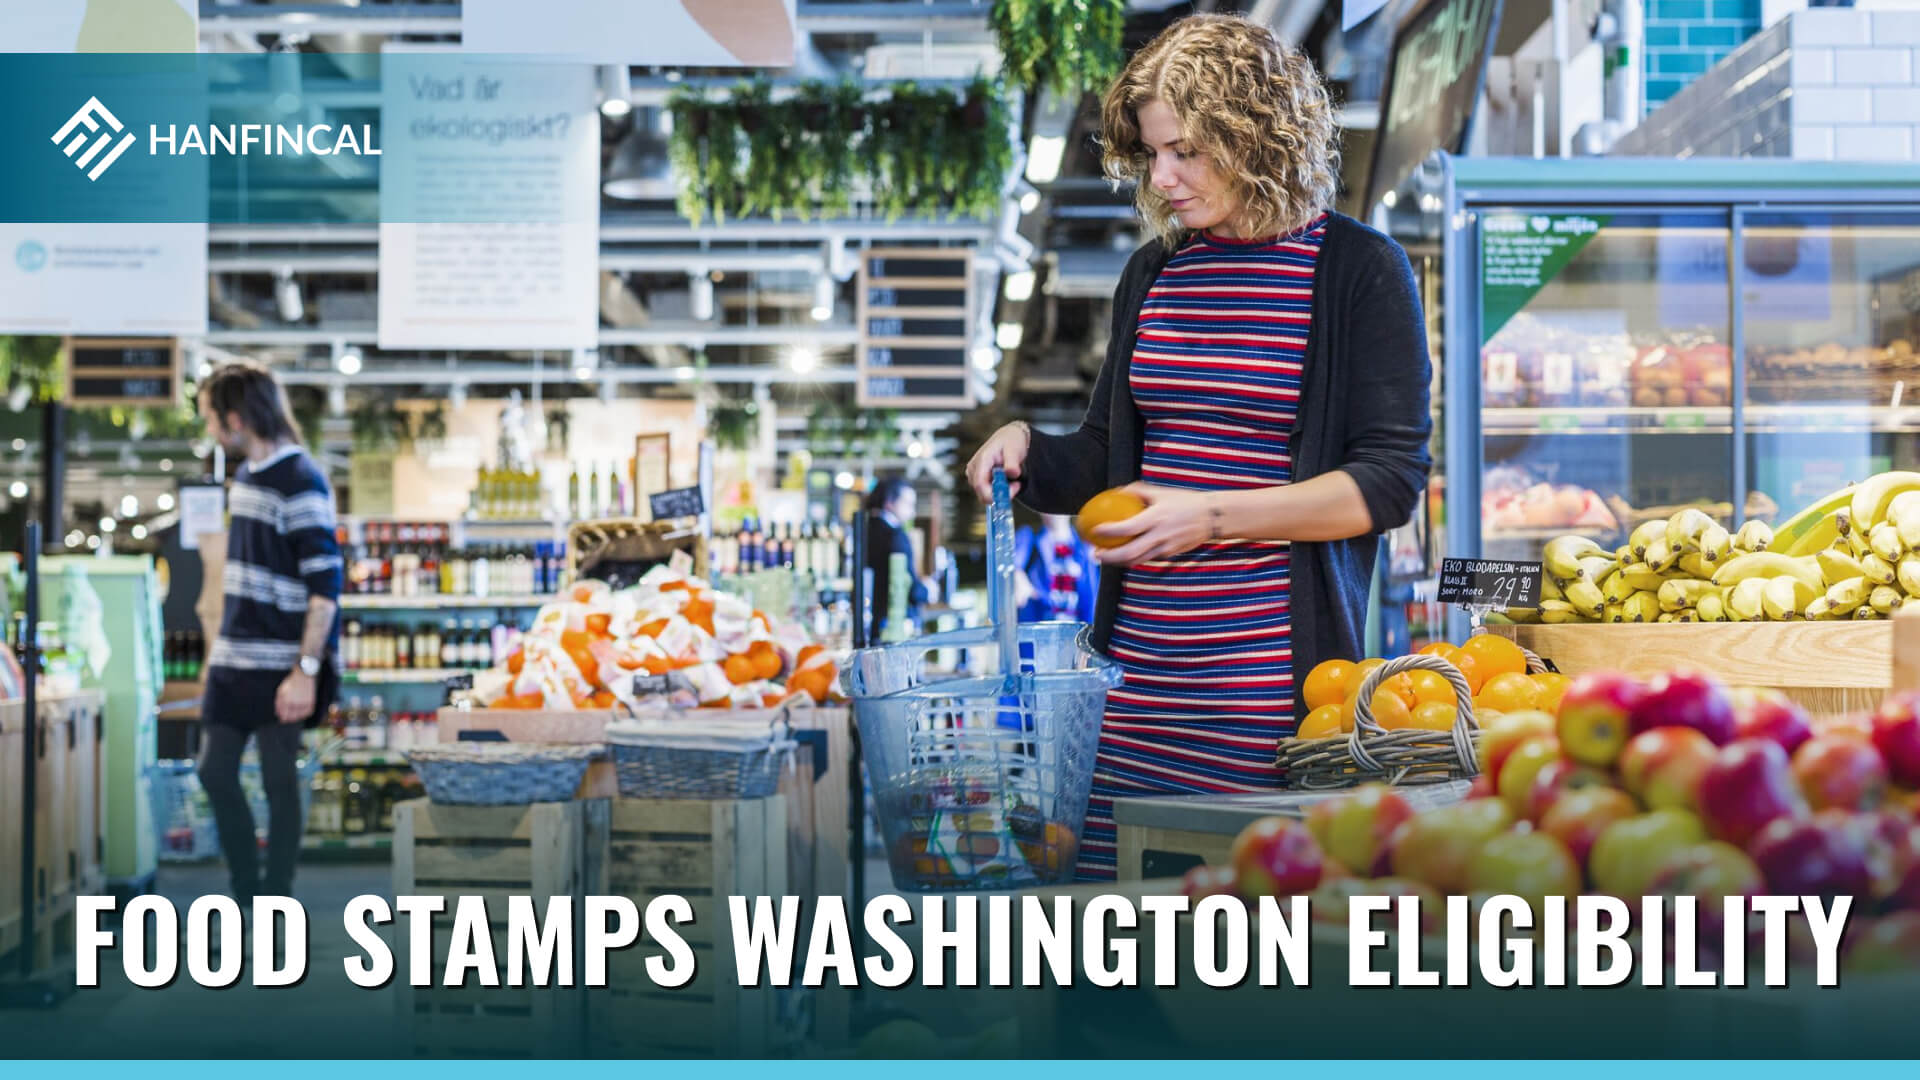 How To Apply For Food Stamps In Washington State?